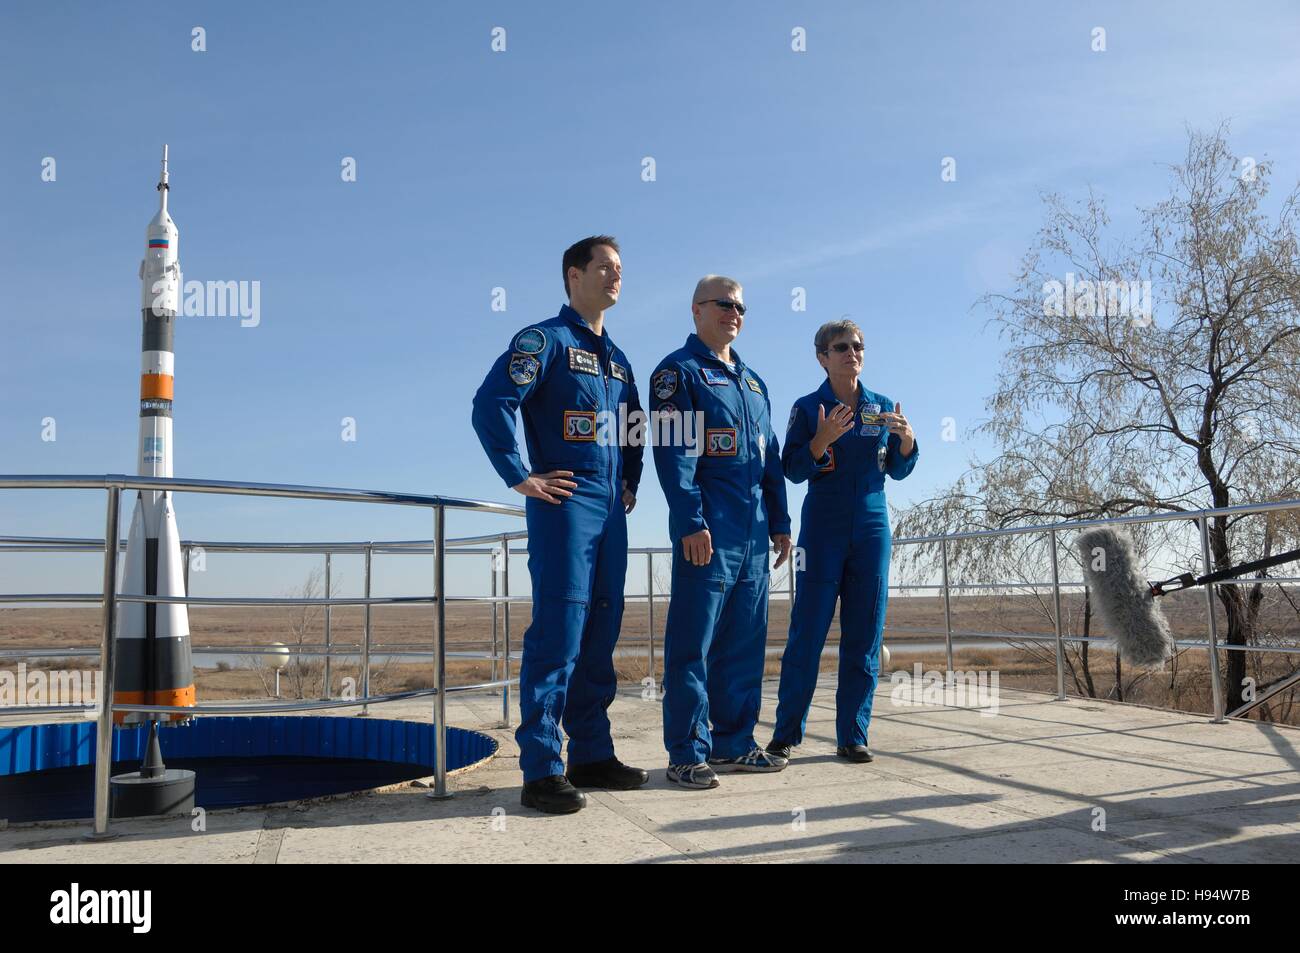 NASA International Space Station Expedition 50-51 prime crew members (L-R) French astronaut Thomas Pesquet of the European Space Agency, Russian cosmonaut Oleg Novitskiy of Roscosmos, and American astronaut Peggy Whitson answer questions during preflight activities at the Cosmonaut Hotel November 10, 2016 in Baikonur, Kazakhstan. Stock Photo